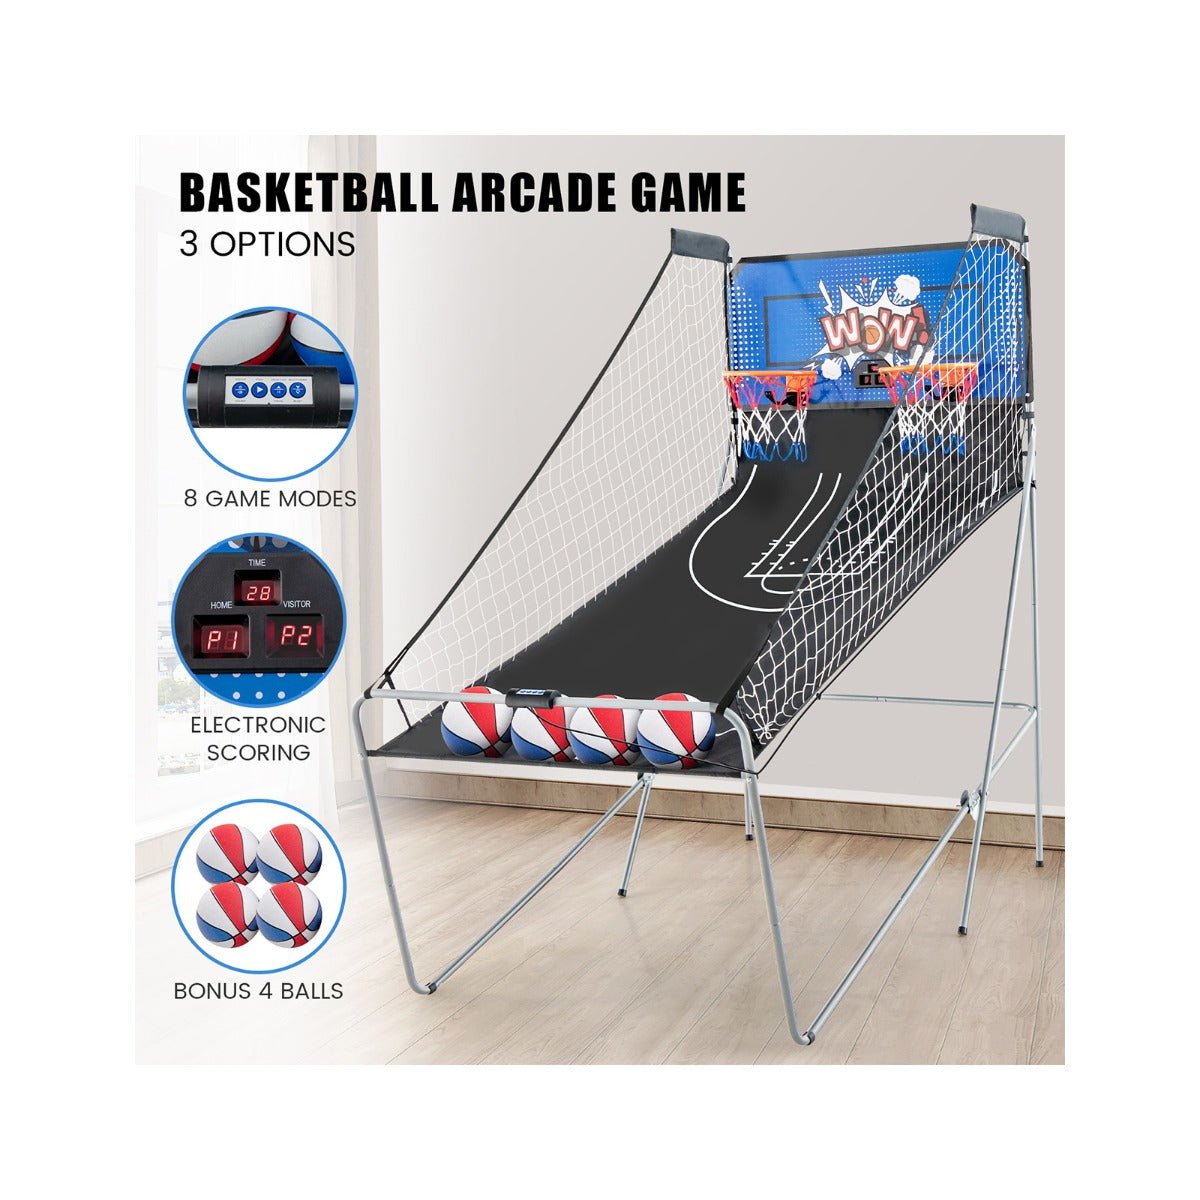 Arcade-Style Basketball Action in Blue